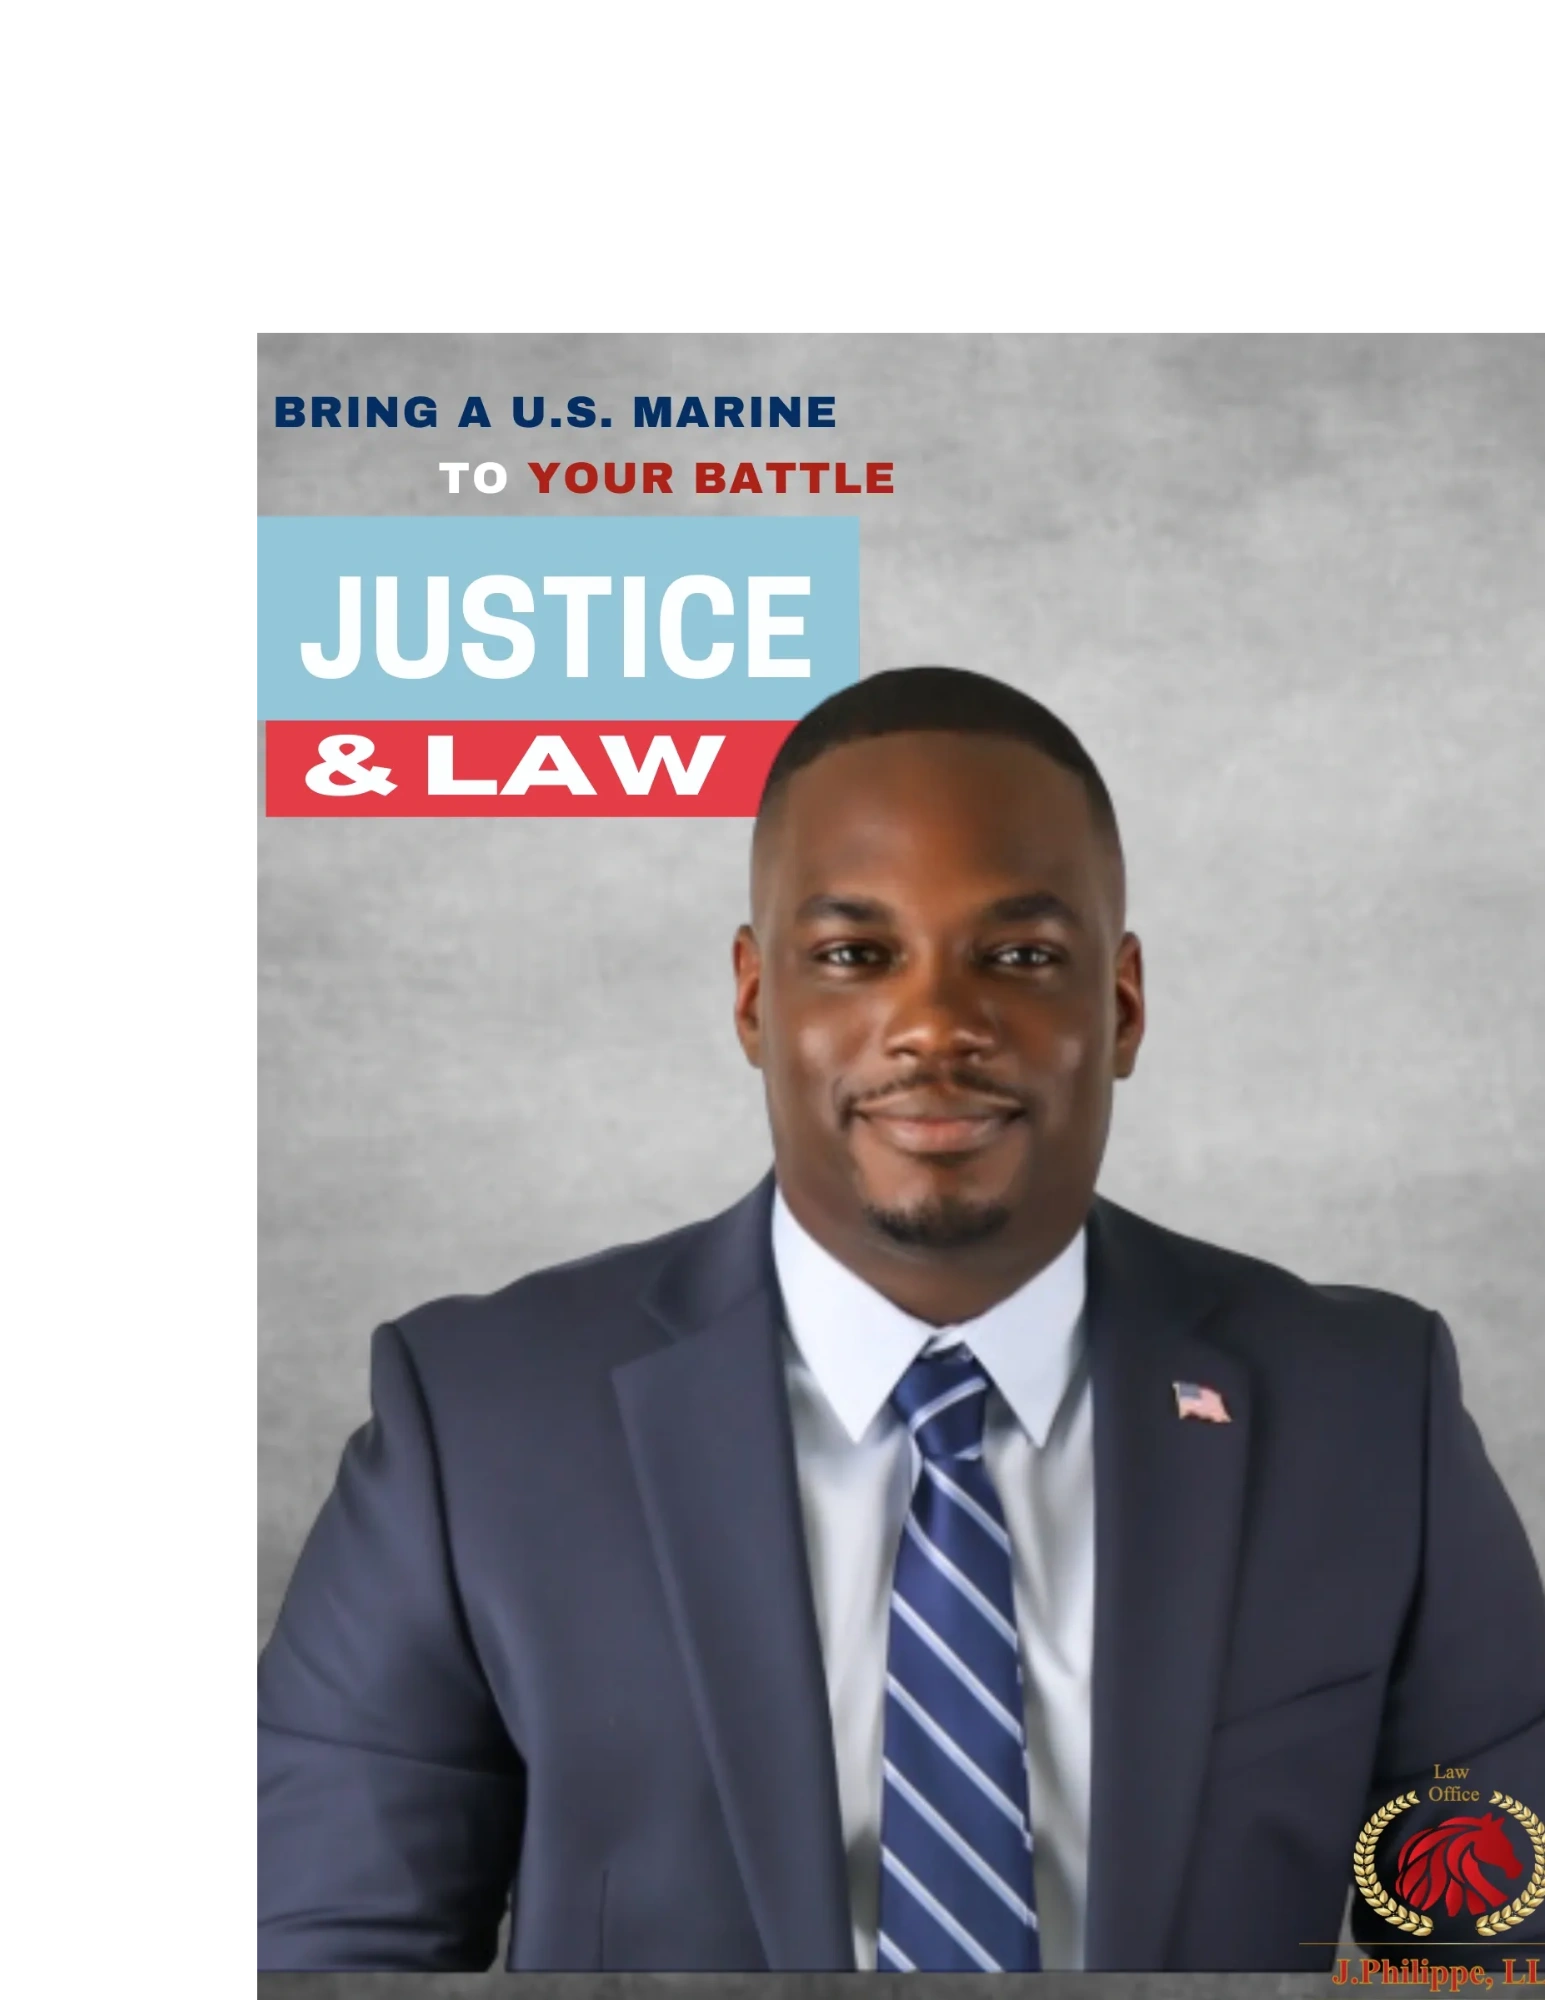 Jesse Philippe, Esq. is a Florida licensed attorney dedicated to helping victims of Negligent driver